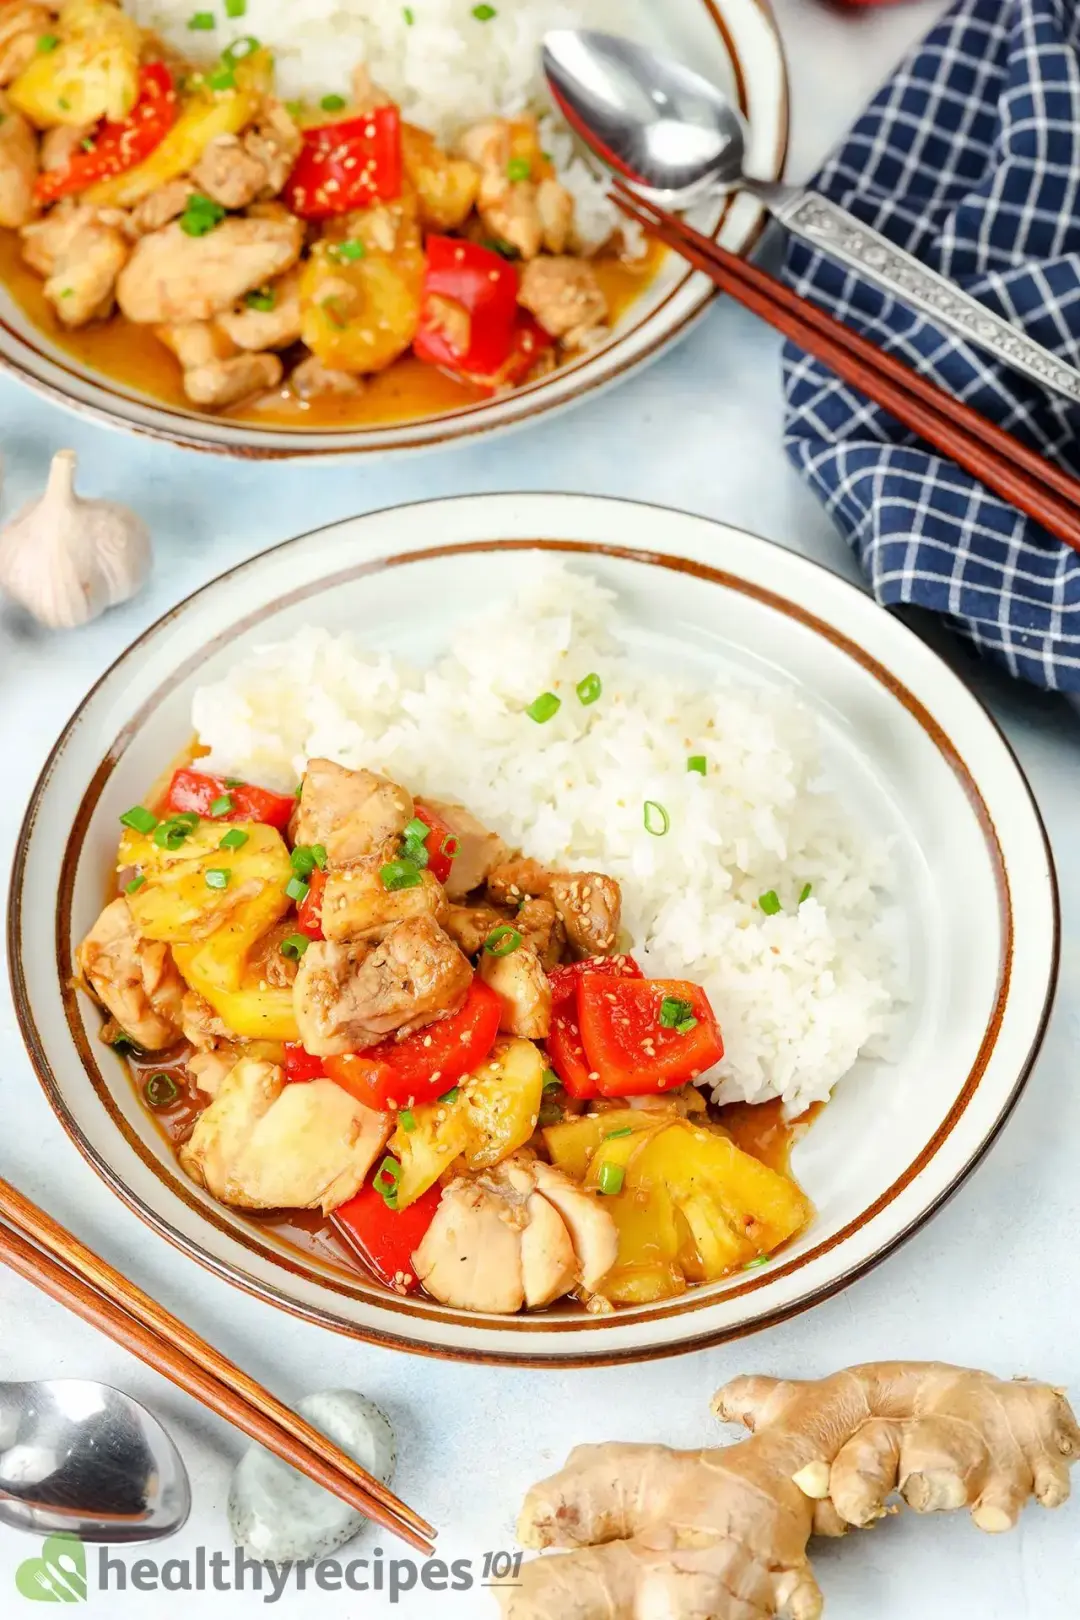 What to Serve With Pineapple Chicken